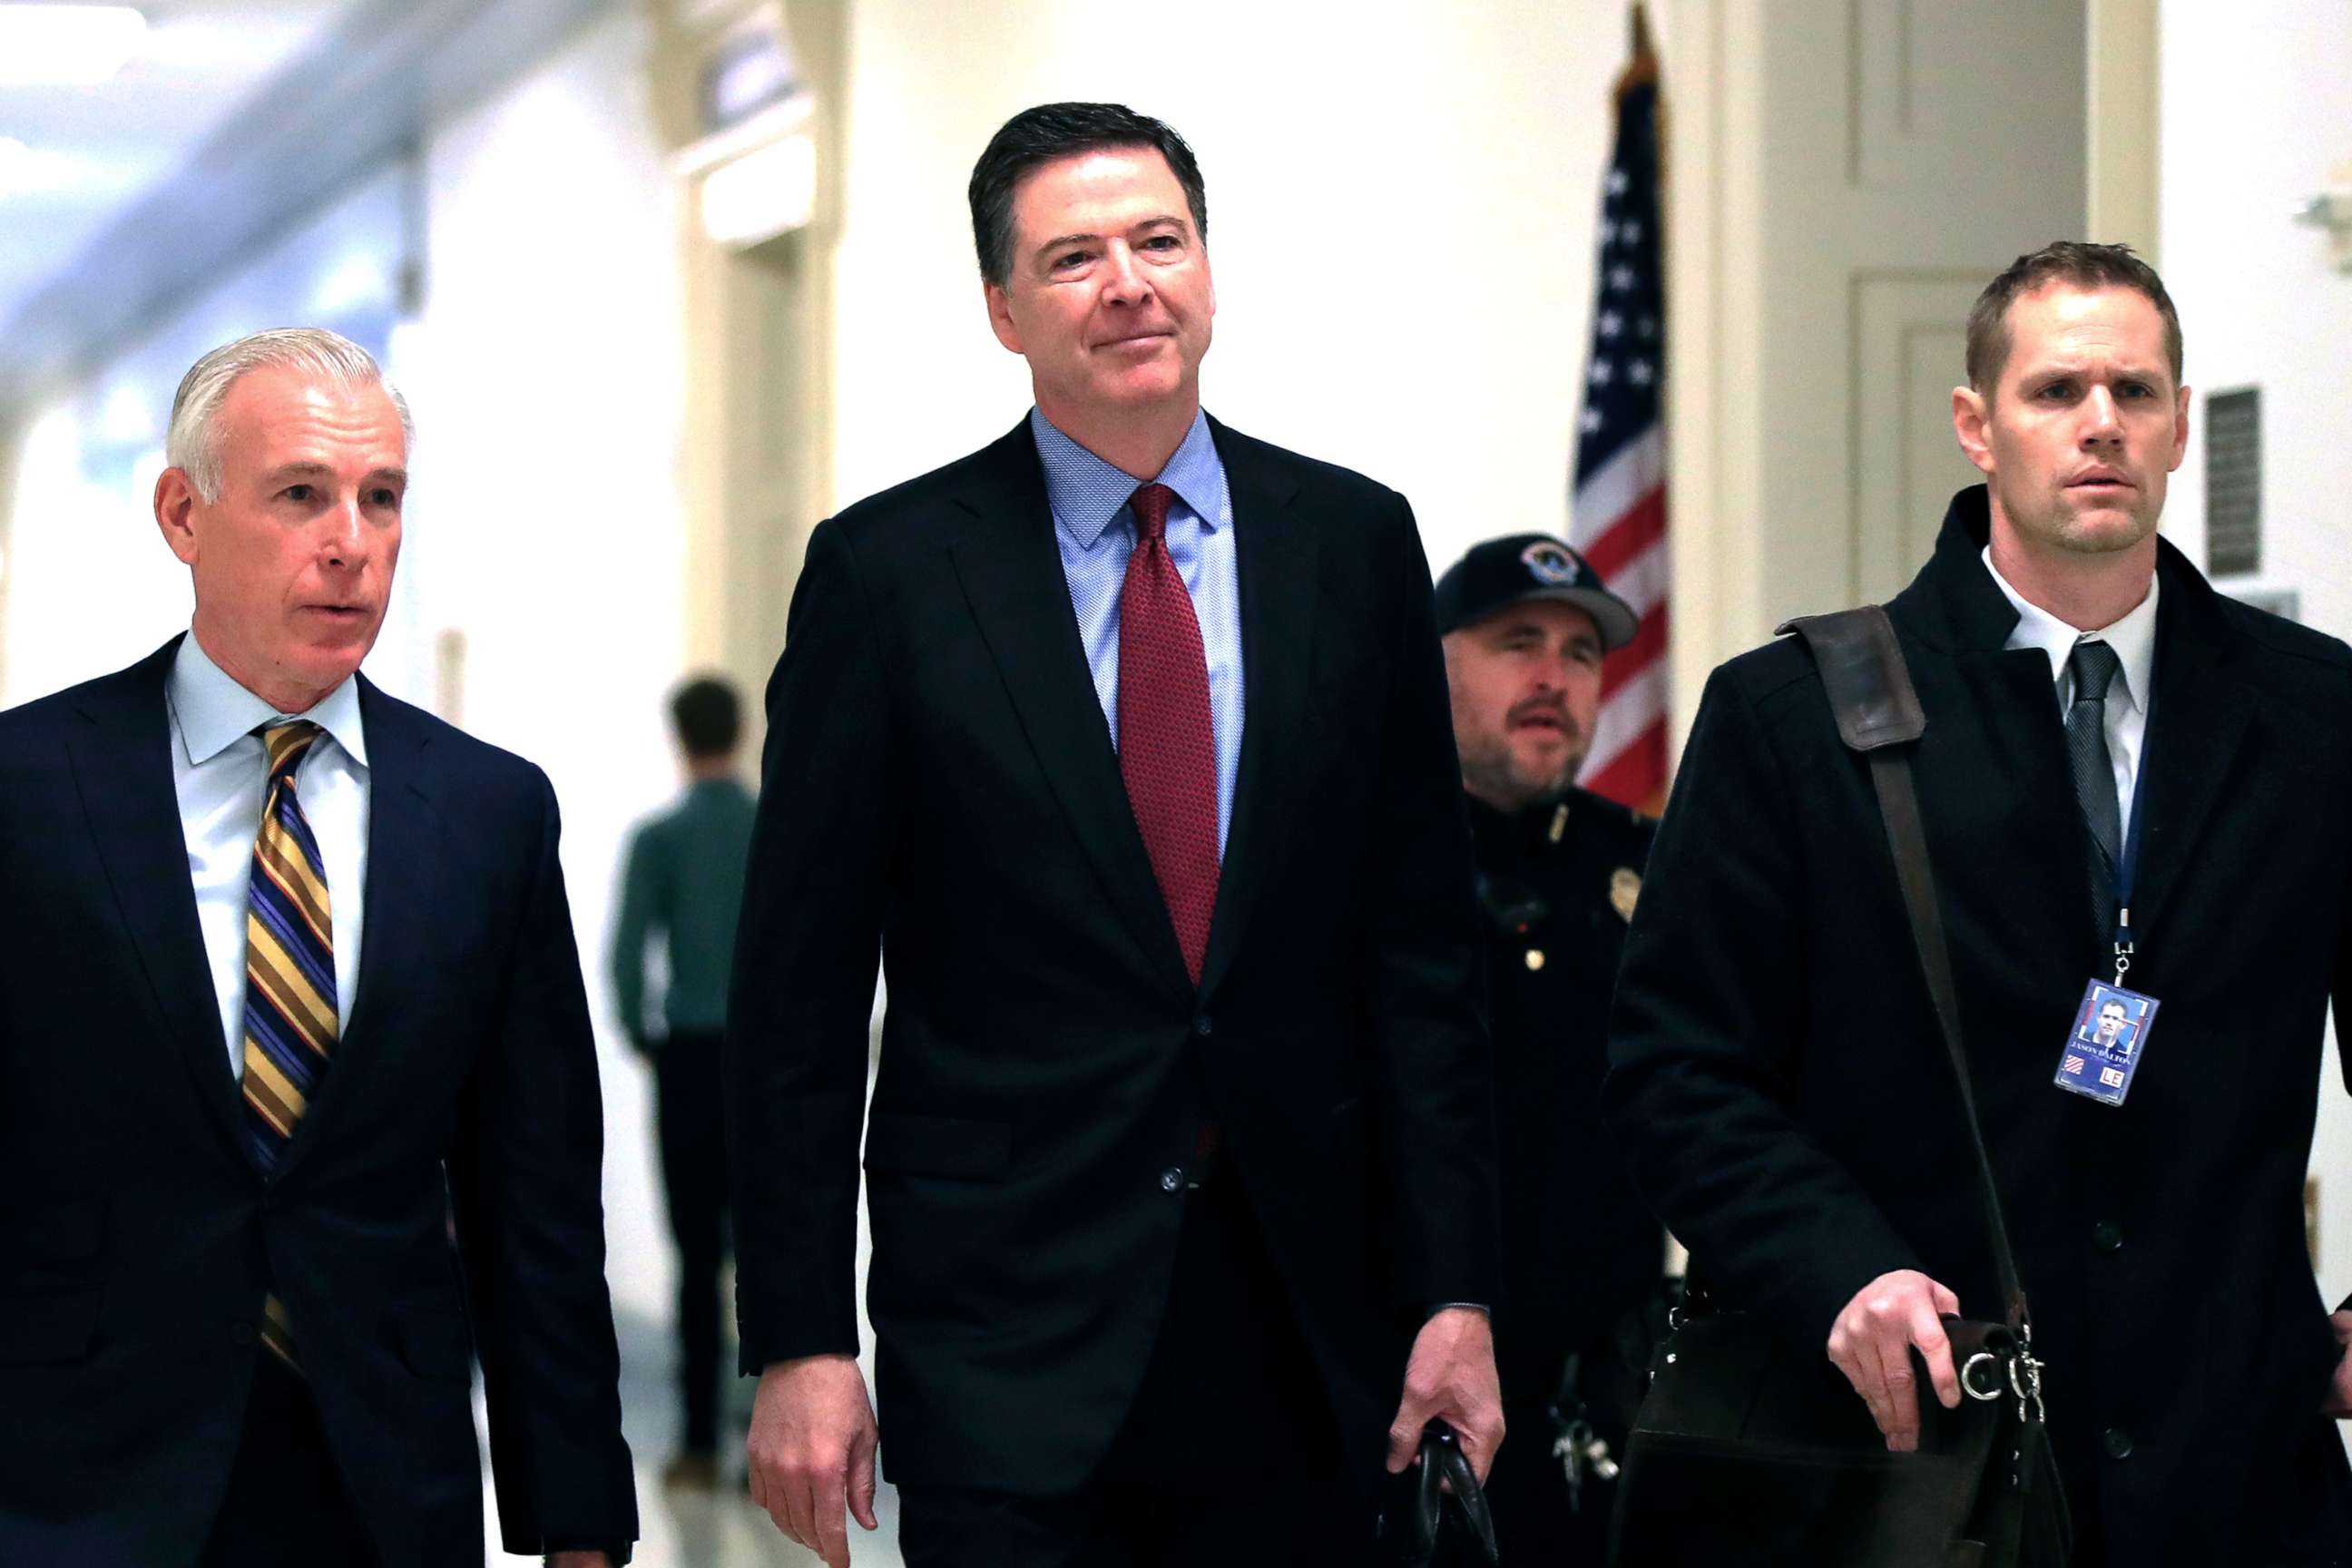 PHOTO: Former FBI Director James Comey, with his attorney, David Kelley, left, arrive to testify under subpoena behind closed doors before the House Judiciary and Oversight Committee on Capitol Hill in Washington, Dec. 7, 2018.